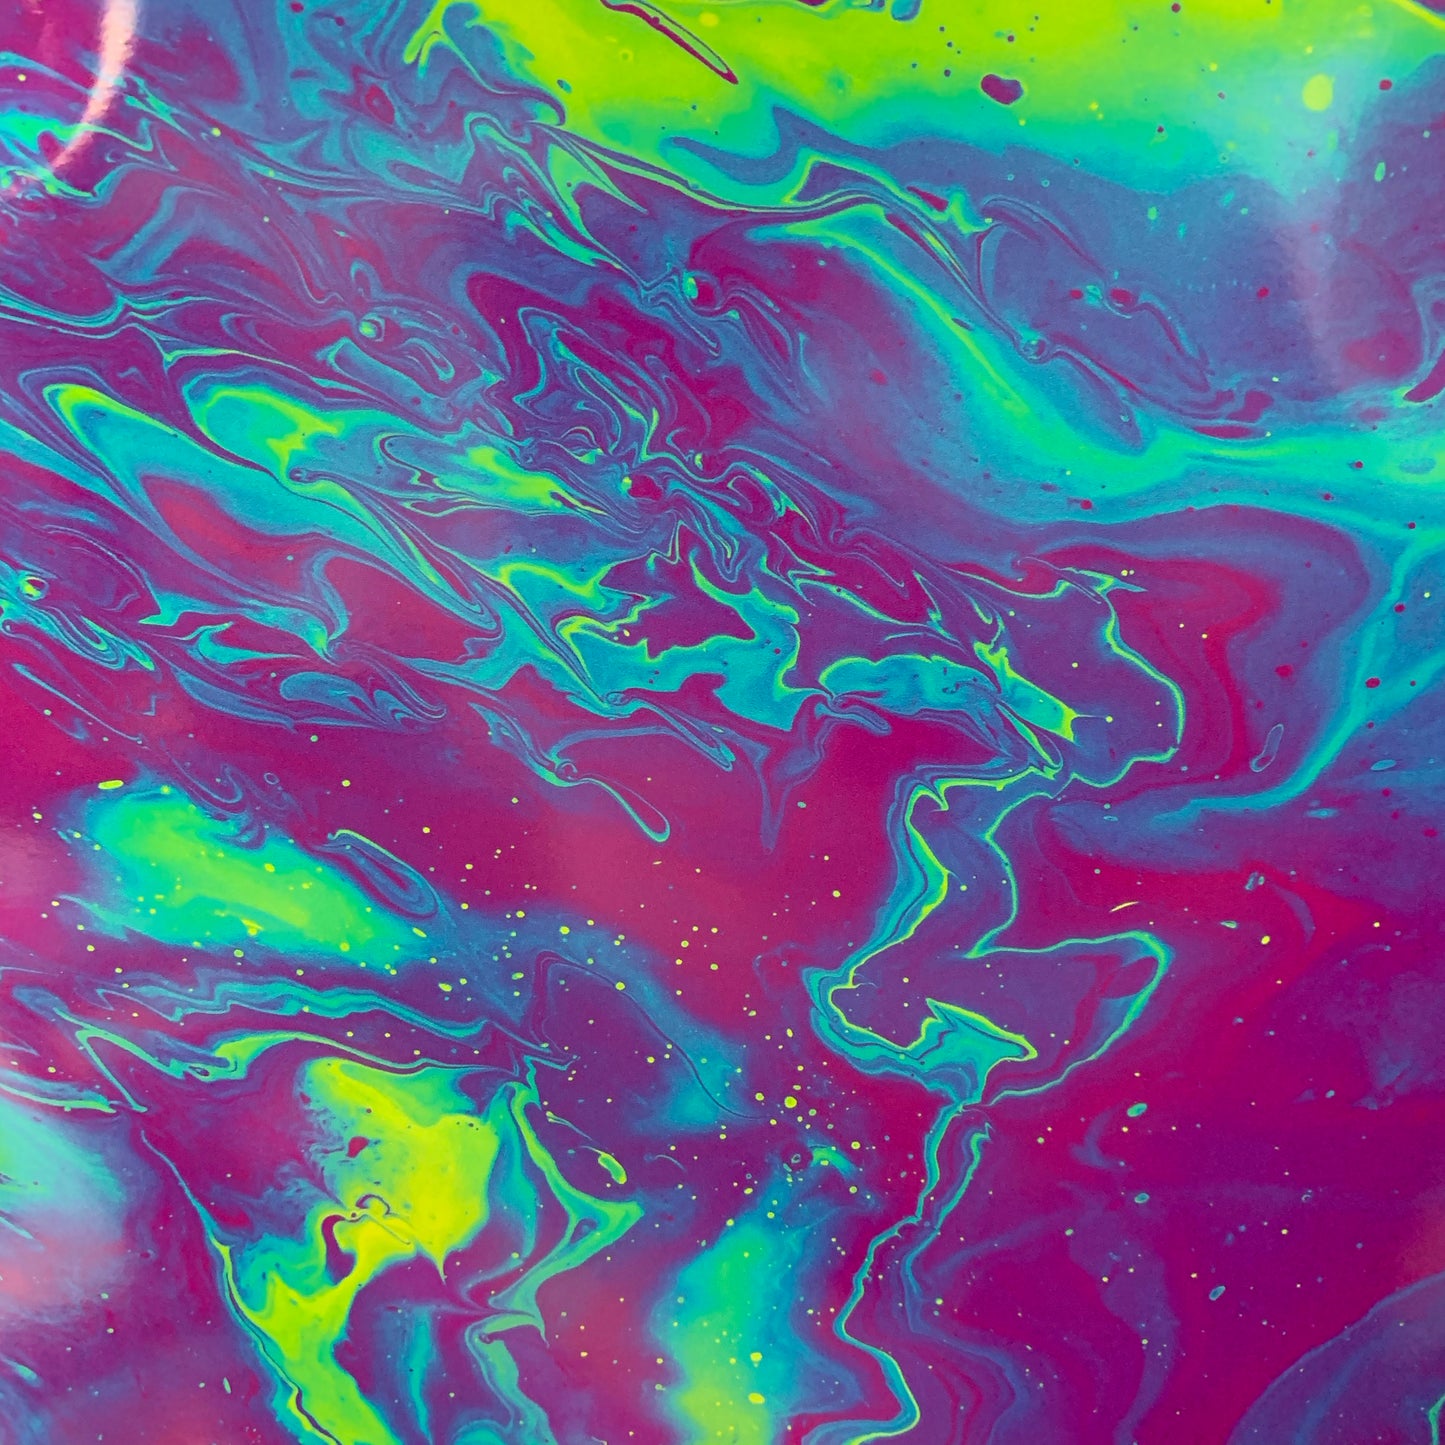 Purple/Teal/Green Pour